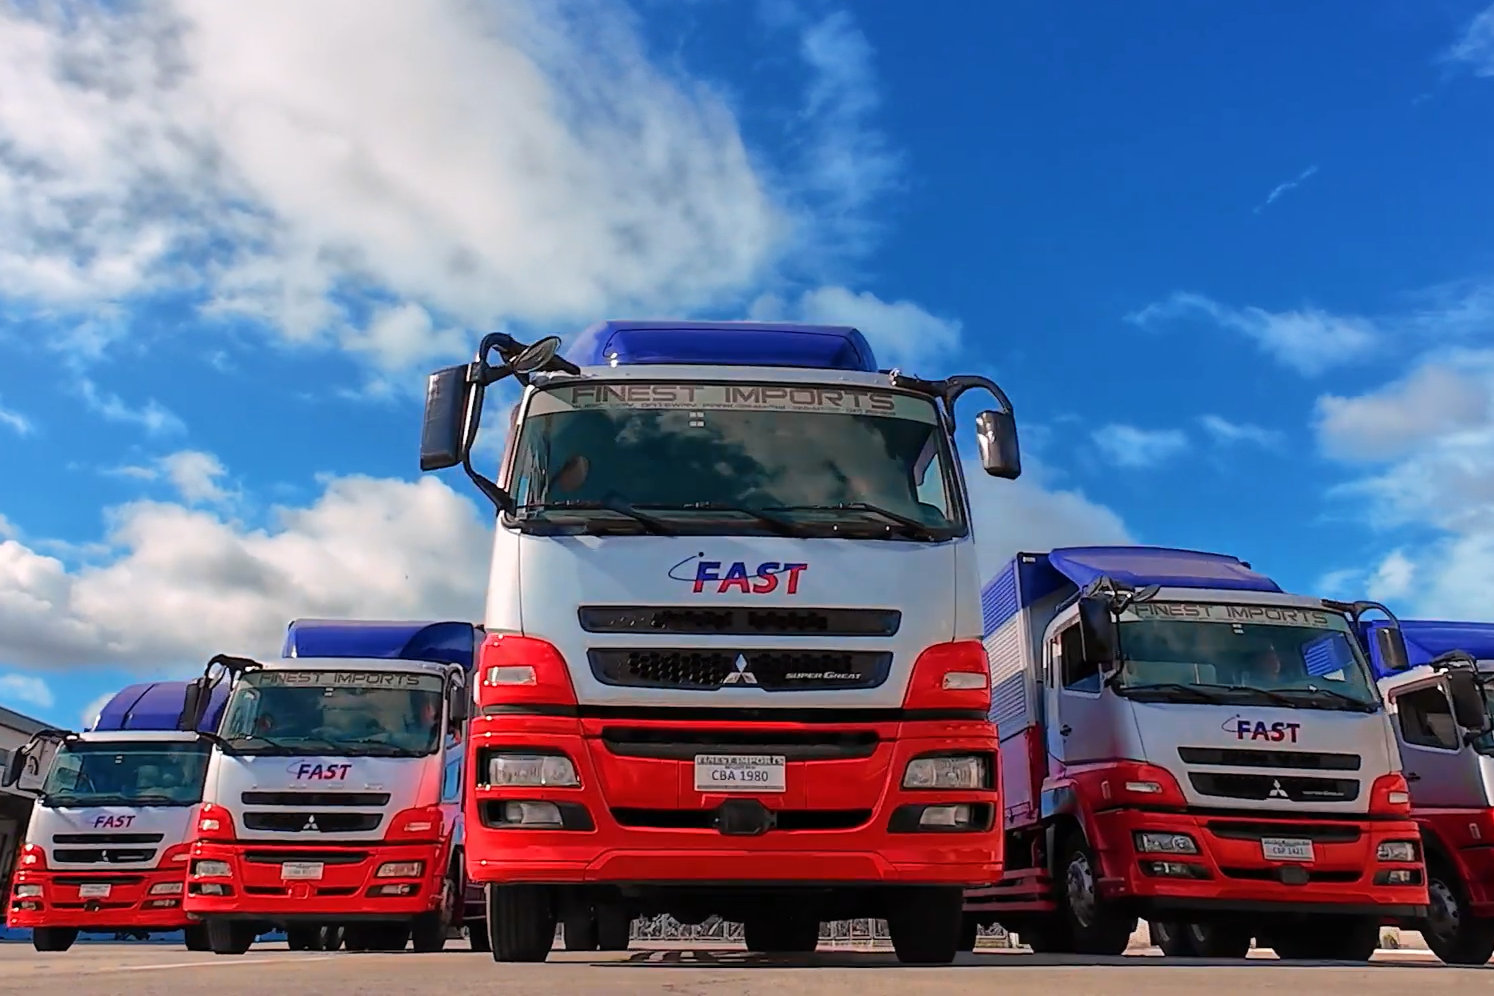 FAST Logistics' massive fleet uses AI Dashcam to boost road safety and operational efficiency